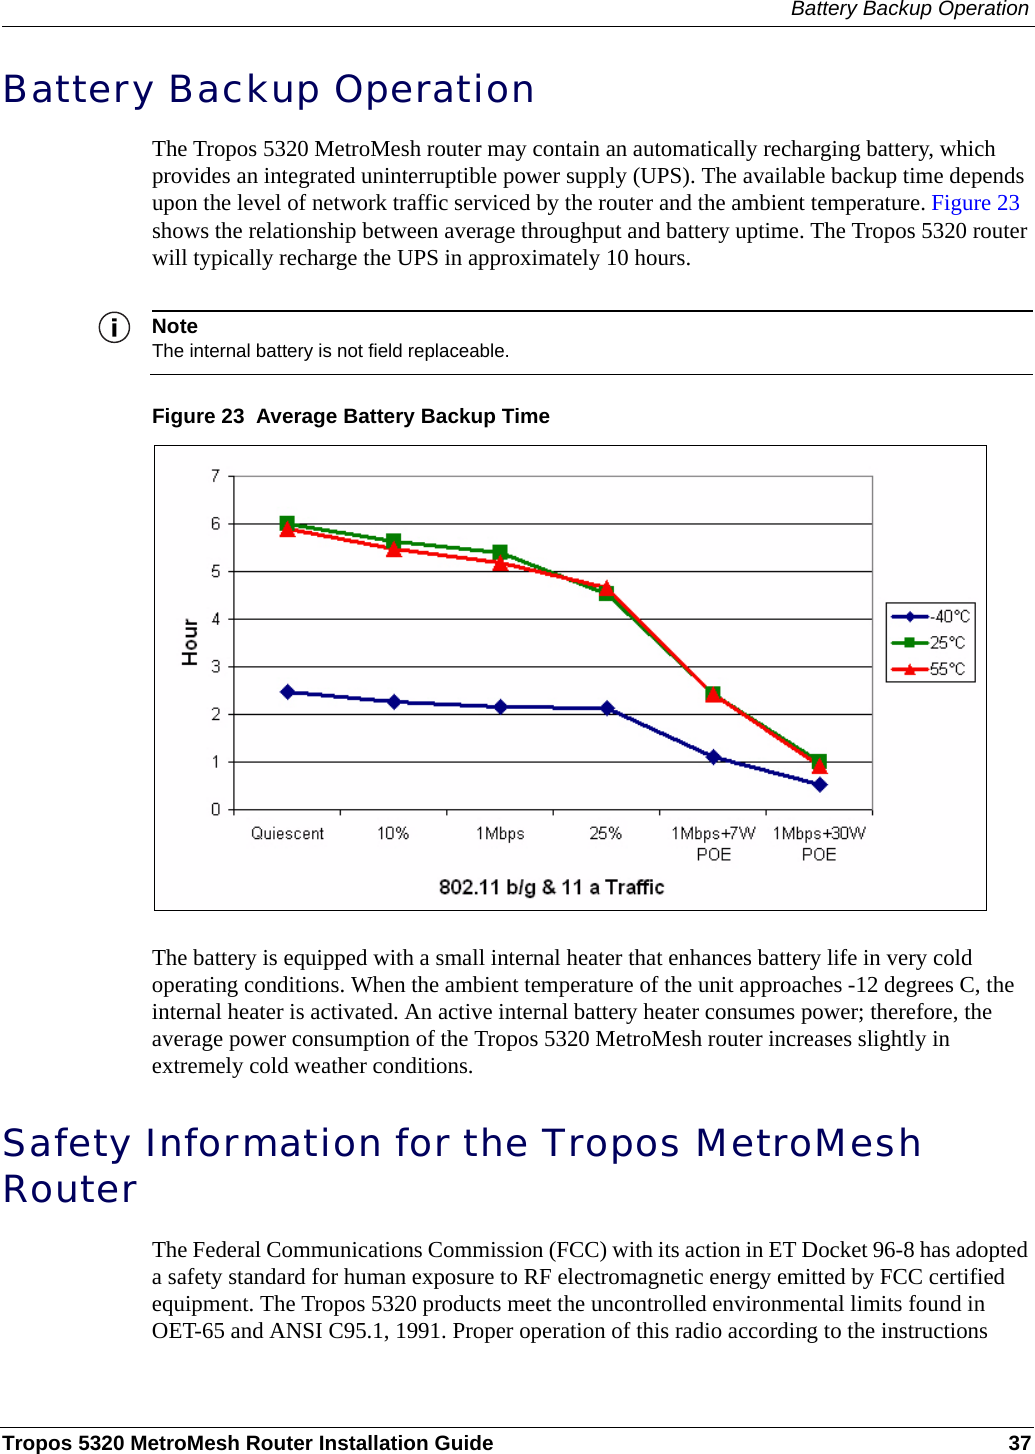 Battery Backup OperationTropos 5320 MetroMesh Router Installation Guide 37Battery Backup OperationThe Tropos 5320 MetroMesh router may contain an automatically recharging battery, which provides an integrated uninterruptible power supply (UPS). The available backup time depends upon the level of network traffic serviced by the router and the ambient temperature. Figure 23 shows the relationship between average throughput and battery uptime. The Tropos 5320 router will typically recharge the UPS in approximately 10 hours.NoteThe internal battery is not field replaceable.Figure 23  Average Battery Backup TimeThe battery is equipped with a small internal heater that enhances battery life in very cold operating conditions. When the ambient temperature of the unit approaches -12 degrees C, the internal heater is activated. An active internal battery heater consumes power; therefore, the average power consumption of the Tropos 5320 MetroMesh router increases slightly in extremely cold weather conditions. Safety Information for the Tropos MetroMesh RouterThe Federal Communications Commission (FCC) with its action in ET Docket 96-8 has adopted a safety standard for human exposure to RF electromagnetic energy emitted by FCC certified equipment. The Tropos 5320 products meet the uncontrolled environmental limits found in OET-65 and ANSI C95.1, 1991. Proper operation of this radio according to the instructions 